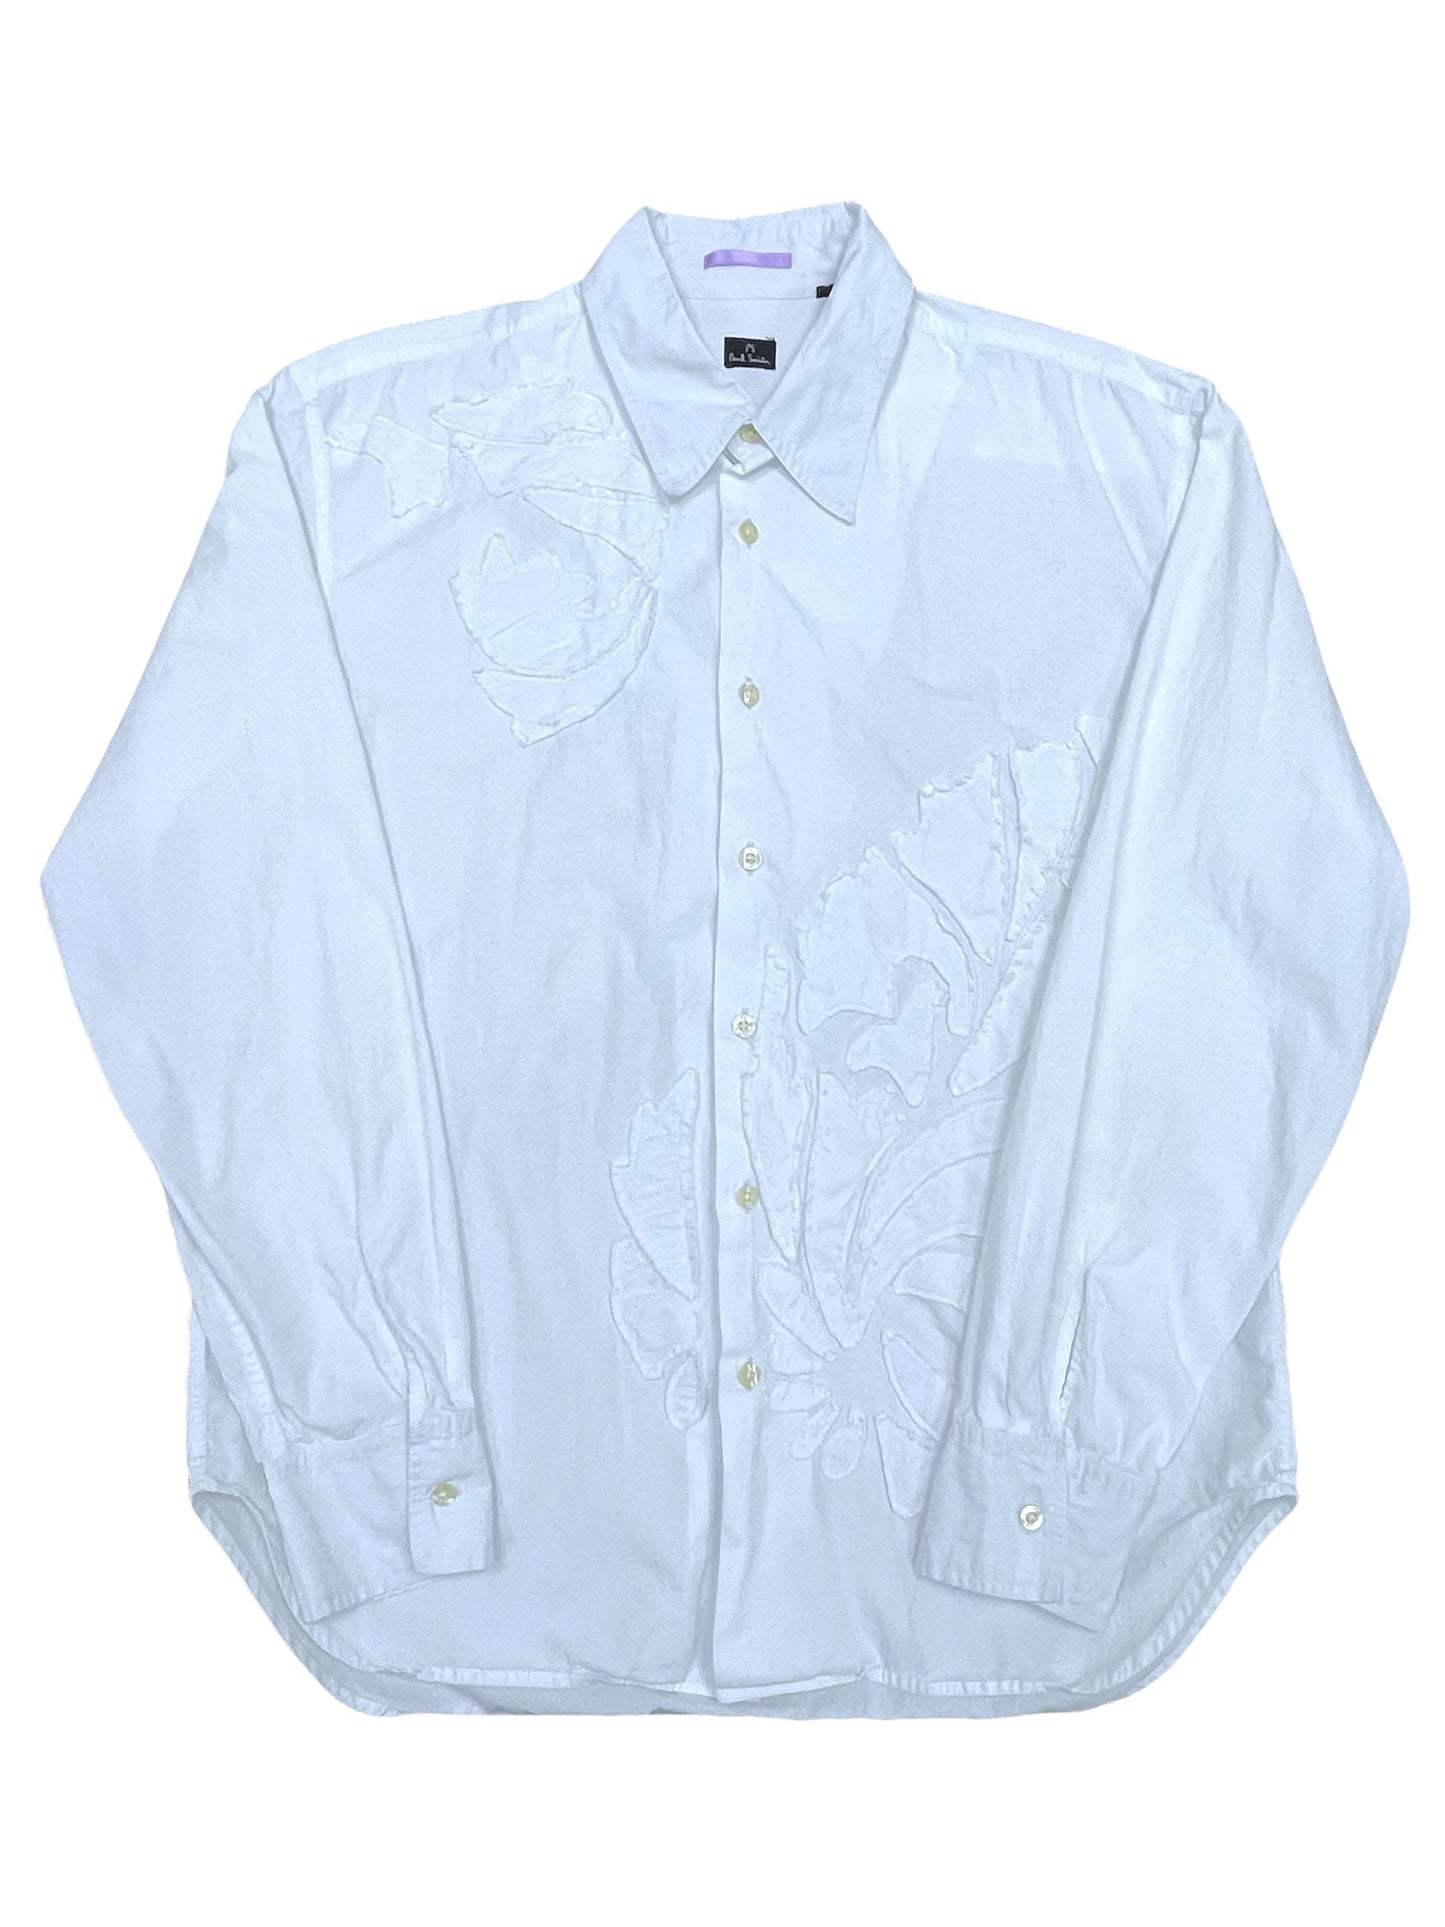 Paul Smith White Embroidered Casual Button Up Shirt Large - Genuine Design